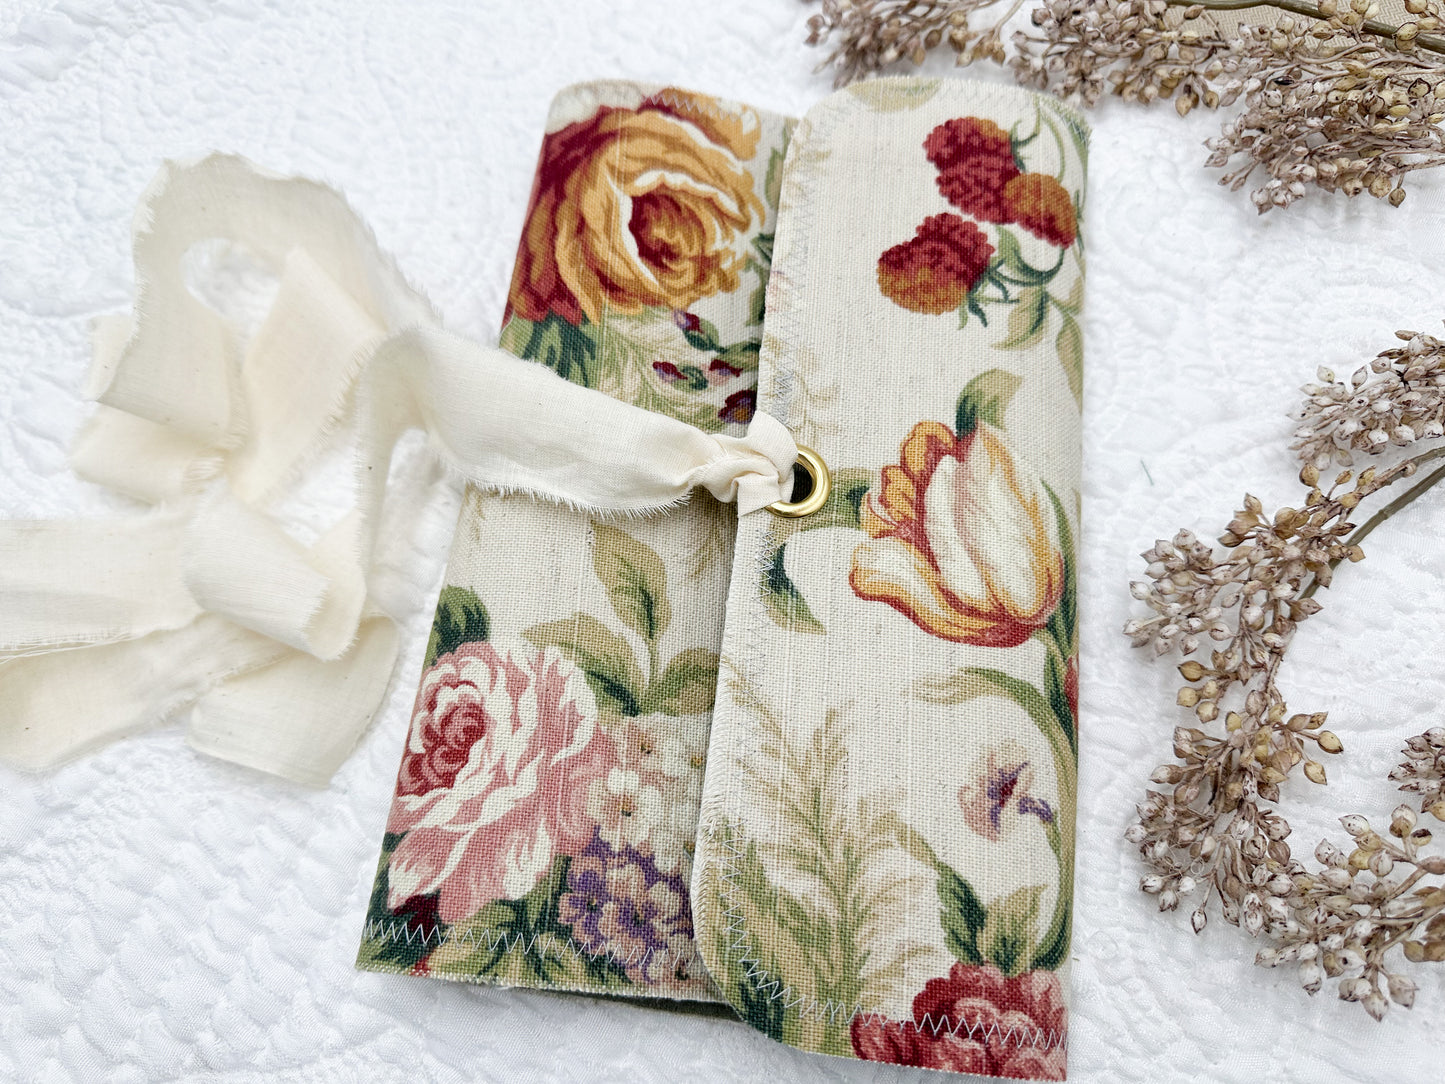 Reversible Journal Cover- Handmade with Vintage Fabrics